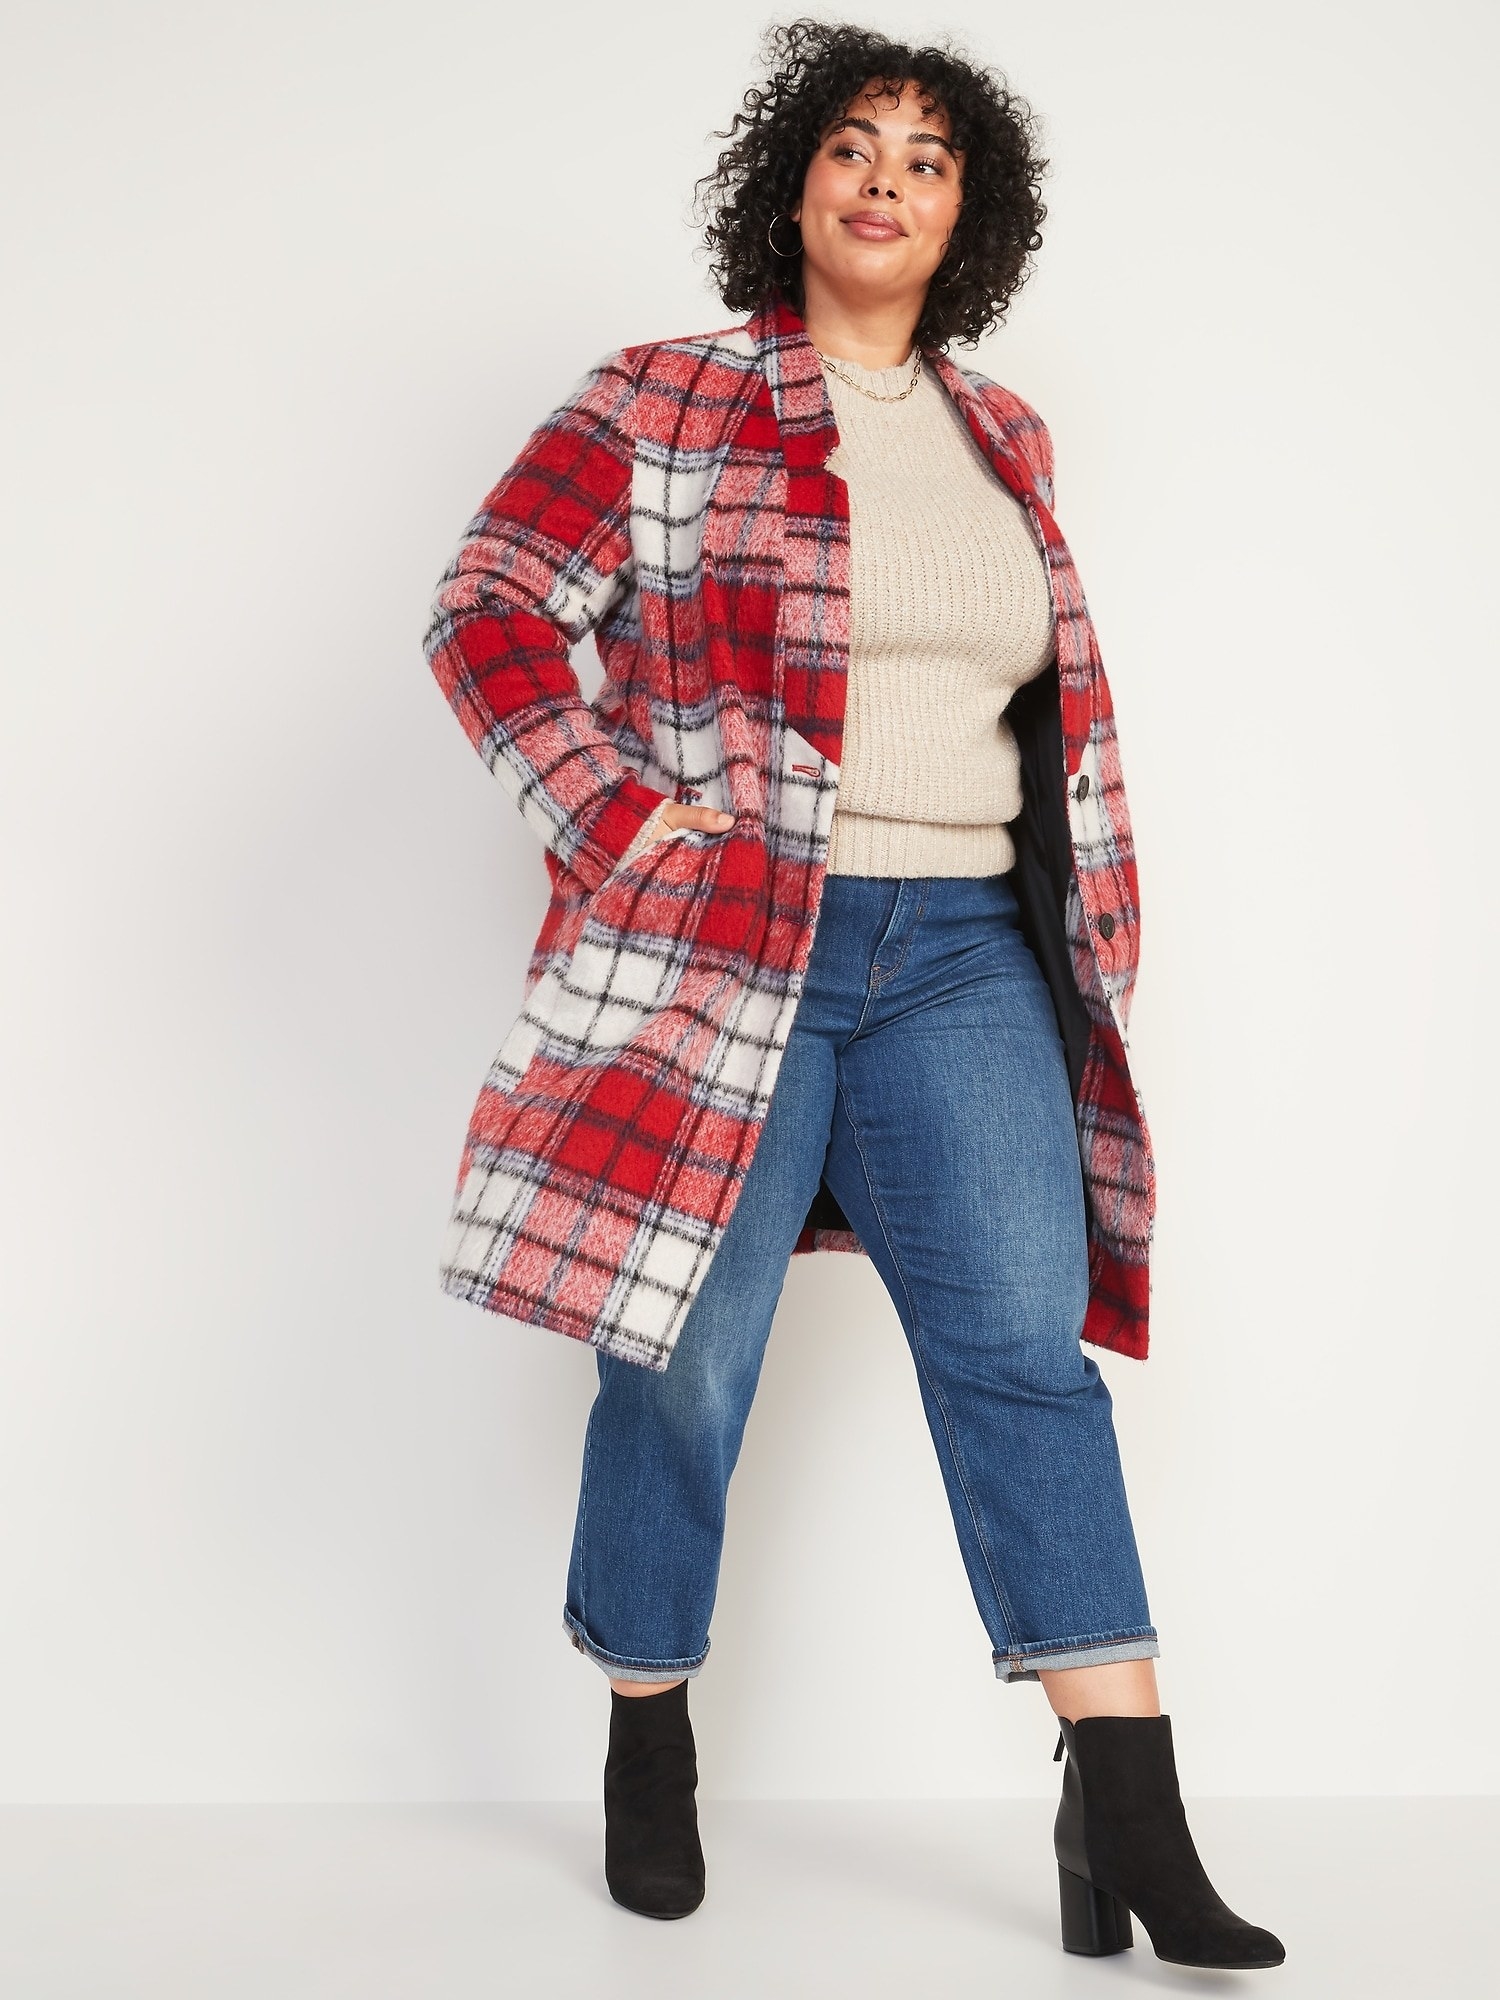 A model wearing the red and white plaid coat that hits just above the knee with jeans and booties